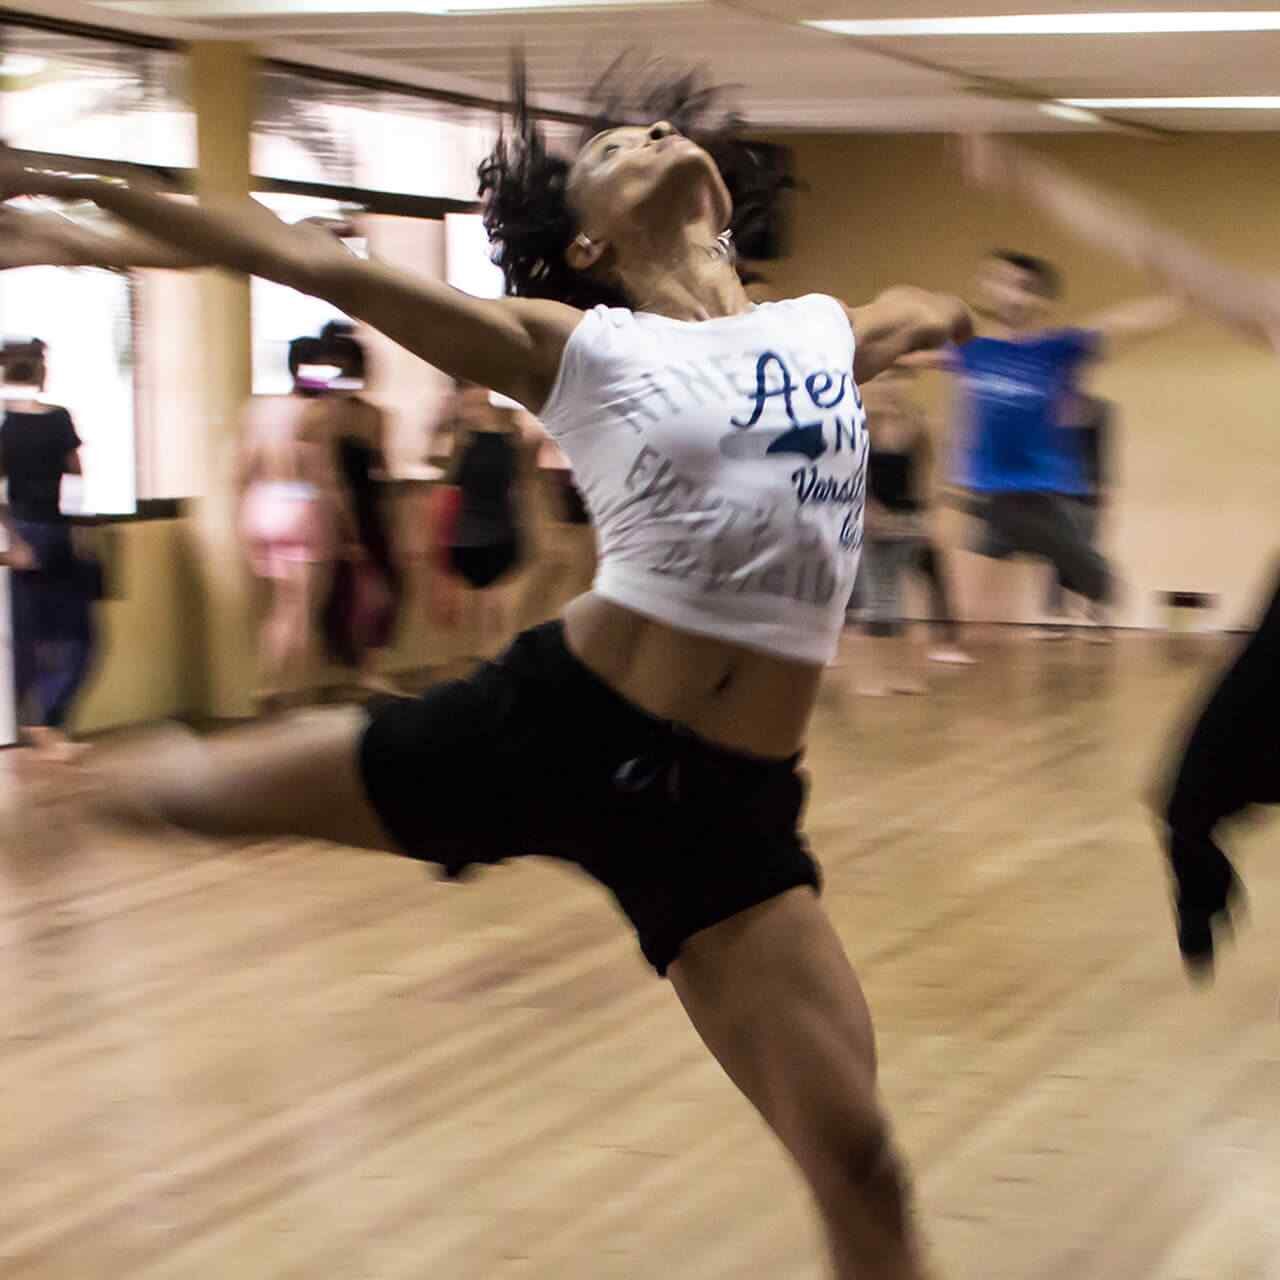 Meet Sheila: Contemporary dance instructor at “Happy Dance”